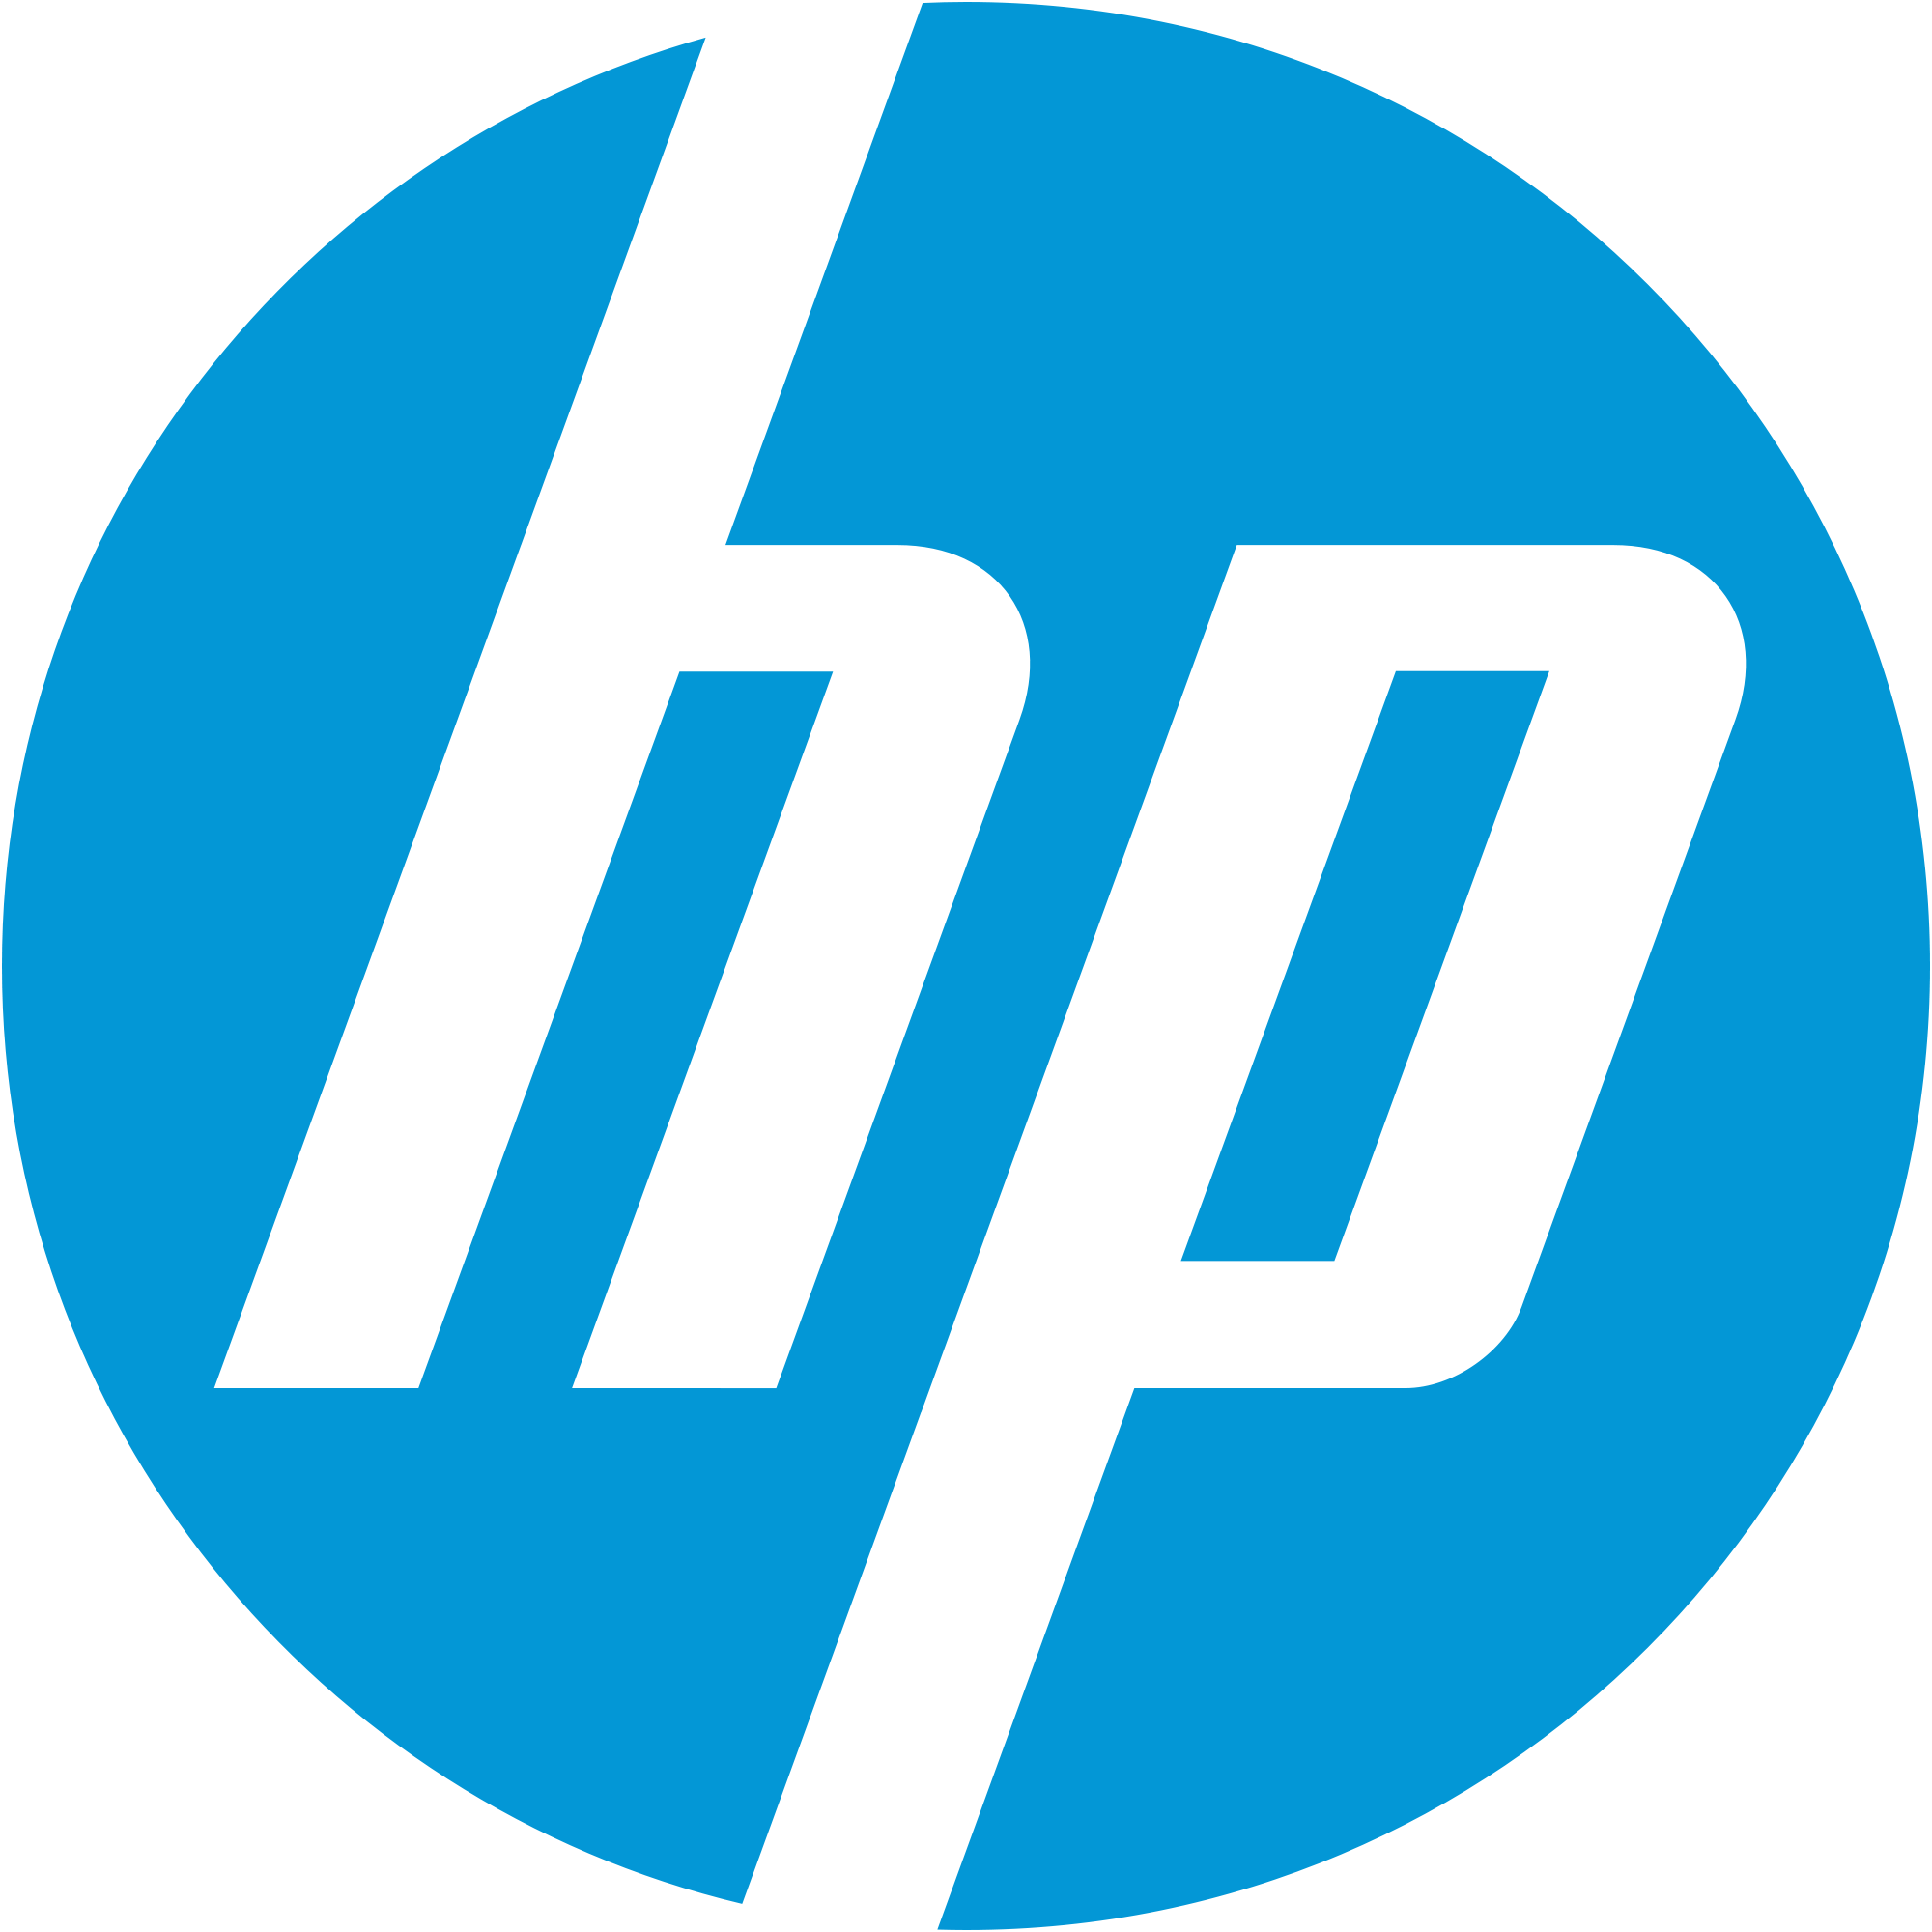 HP Unveils Data-Centric Security Protection Enhancements